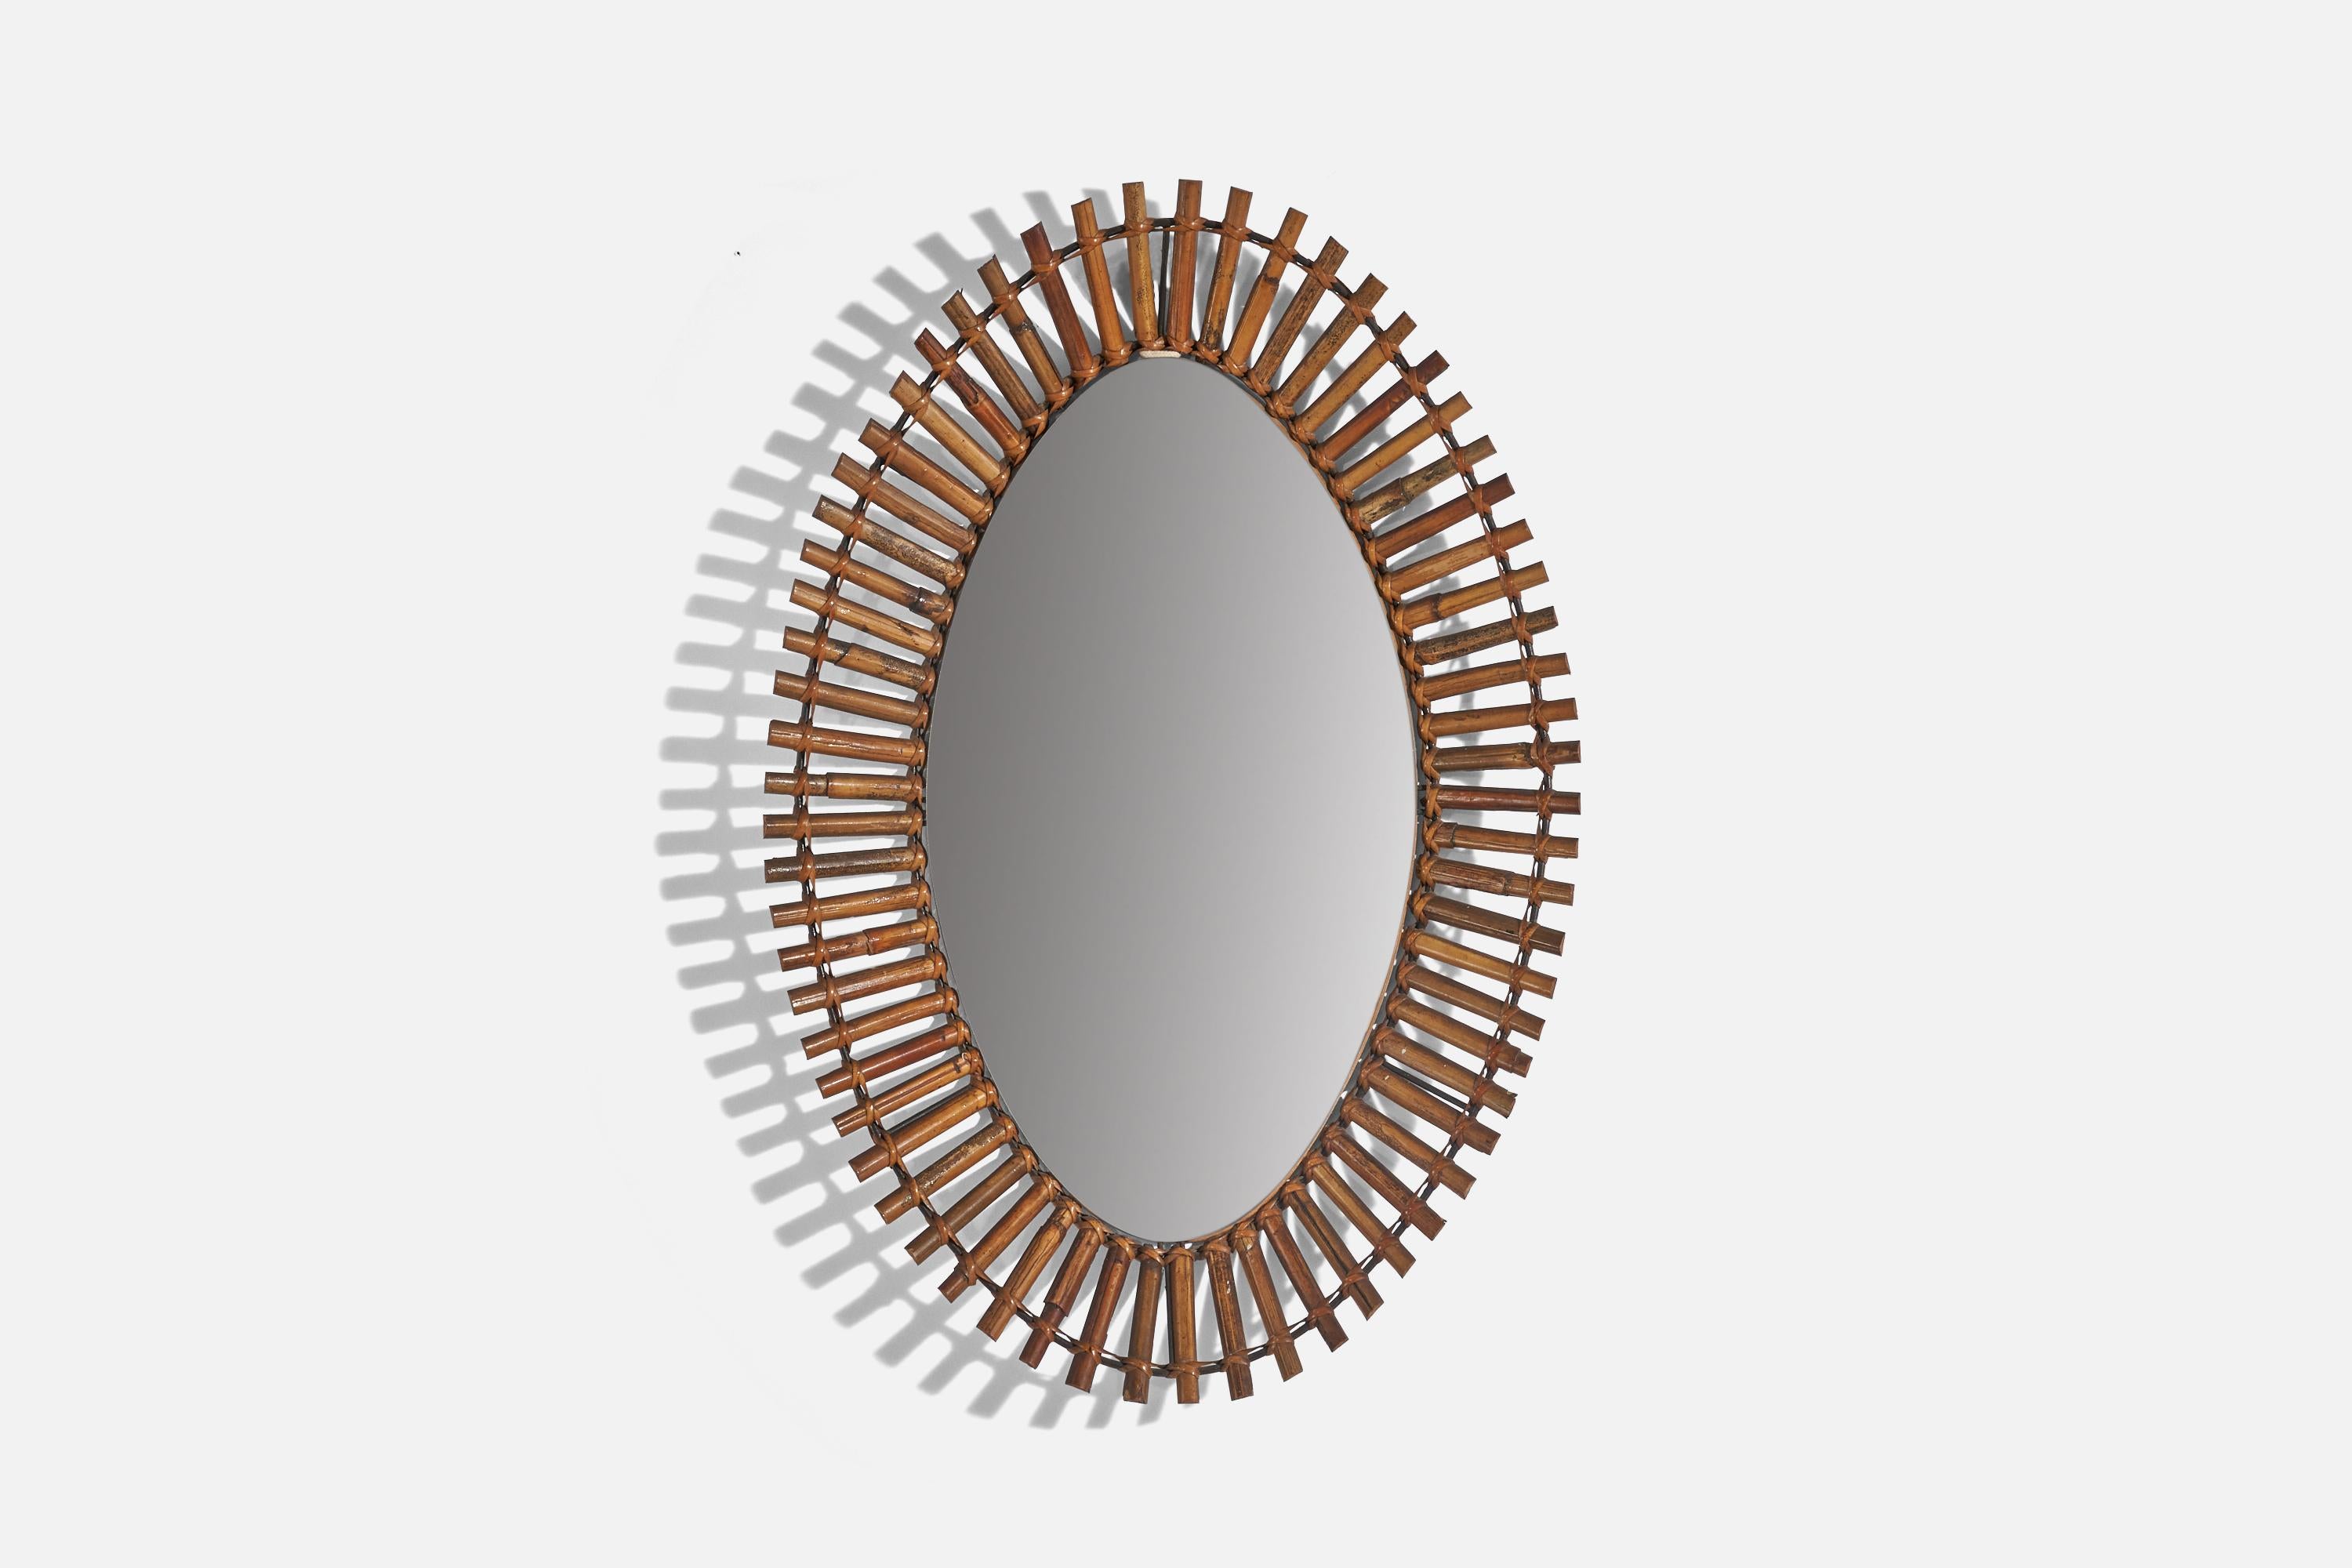 A rattan wall mirror designed and produced by an Italian designer, Italy, c. 1960s.
  